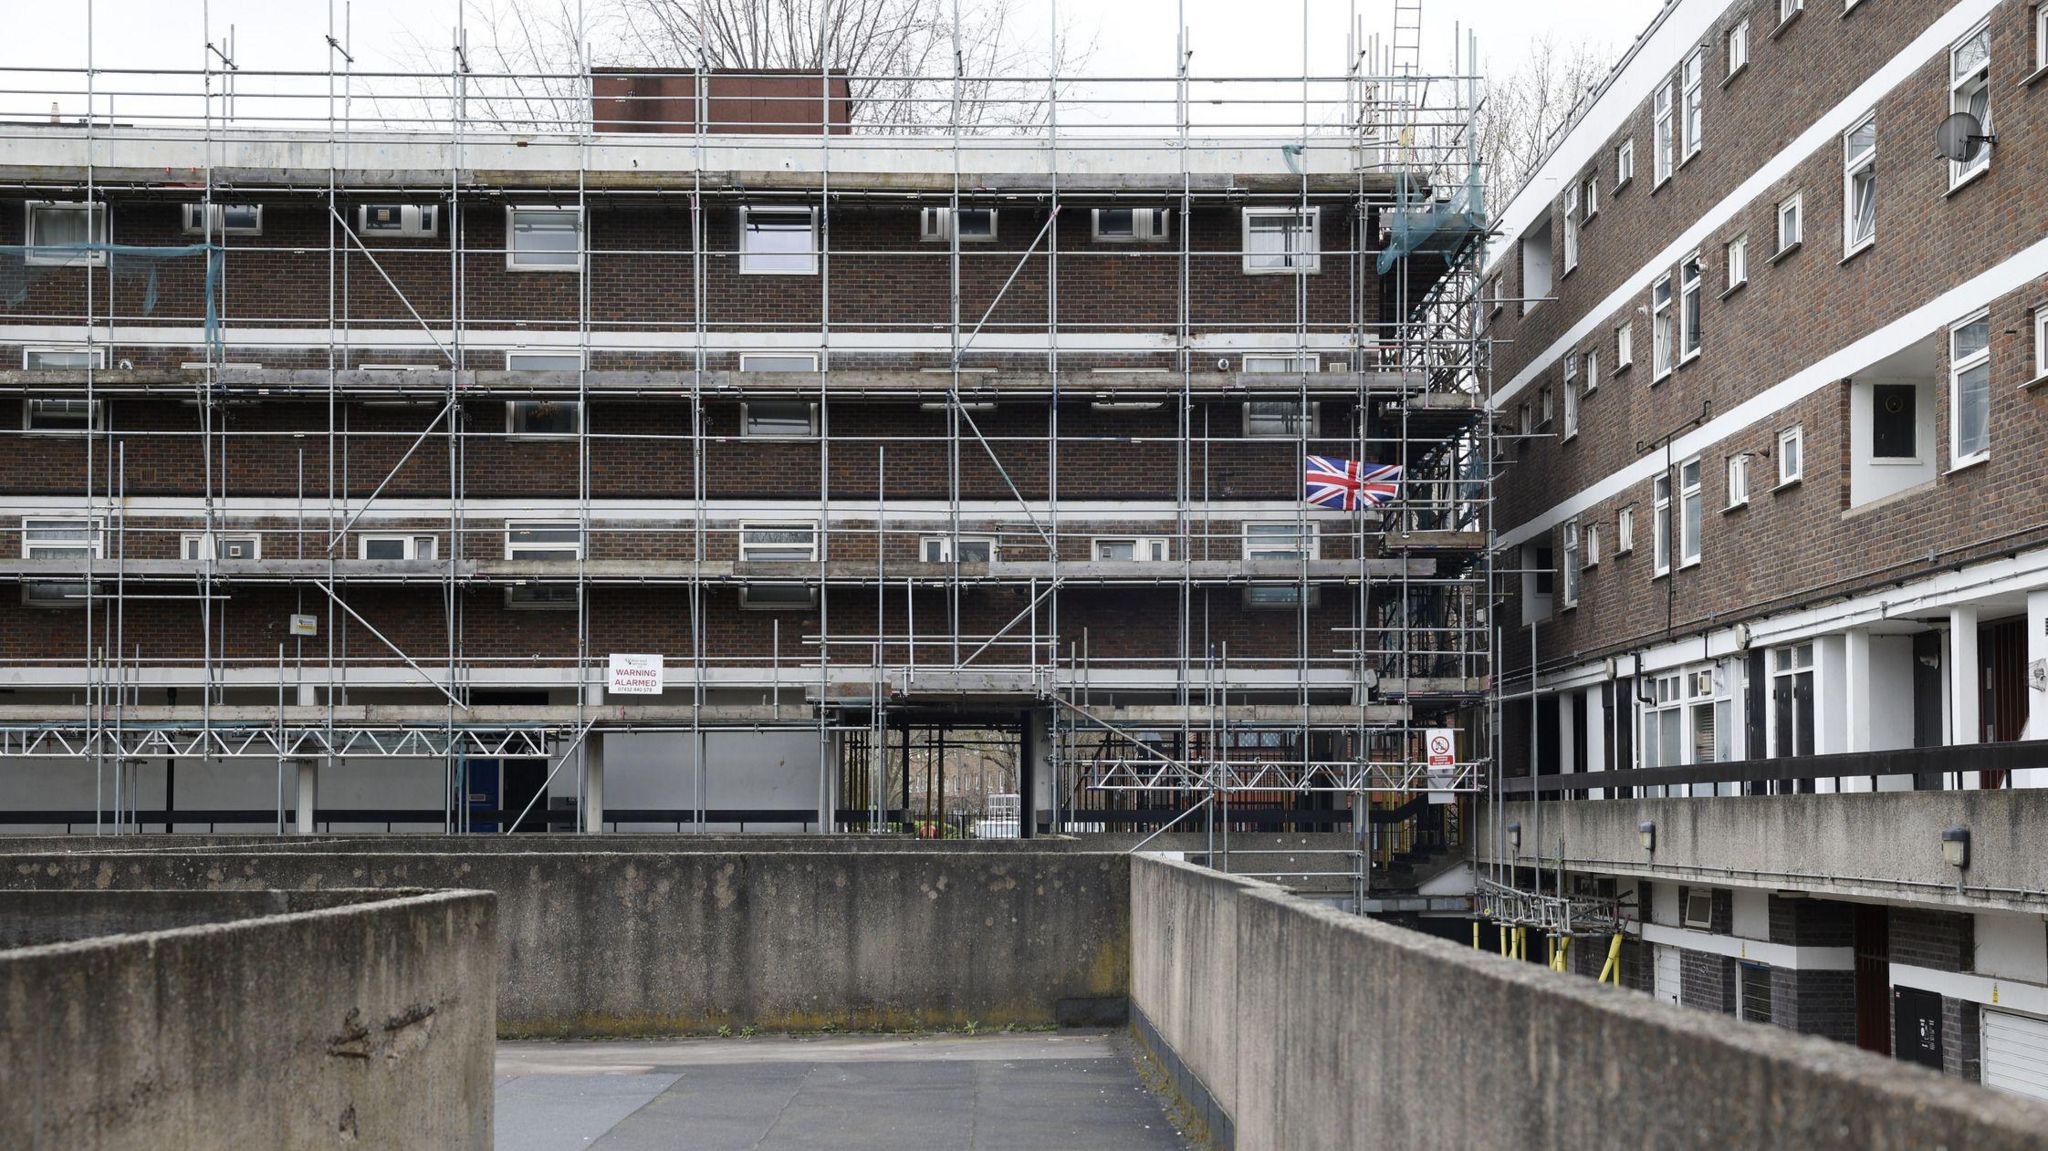 Flats with scaffolding around the exterior